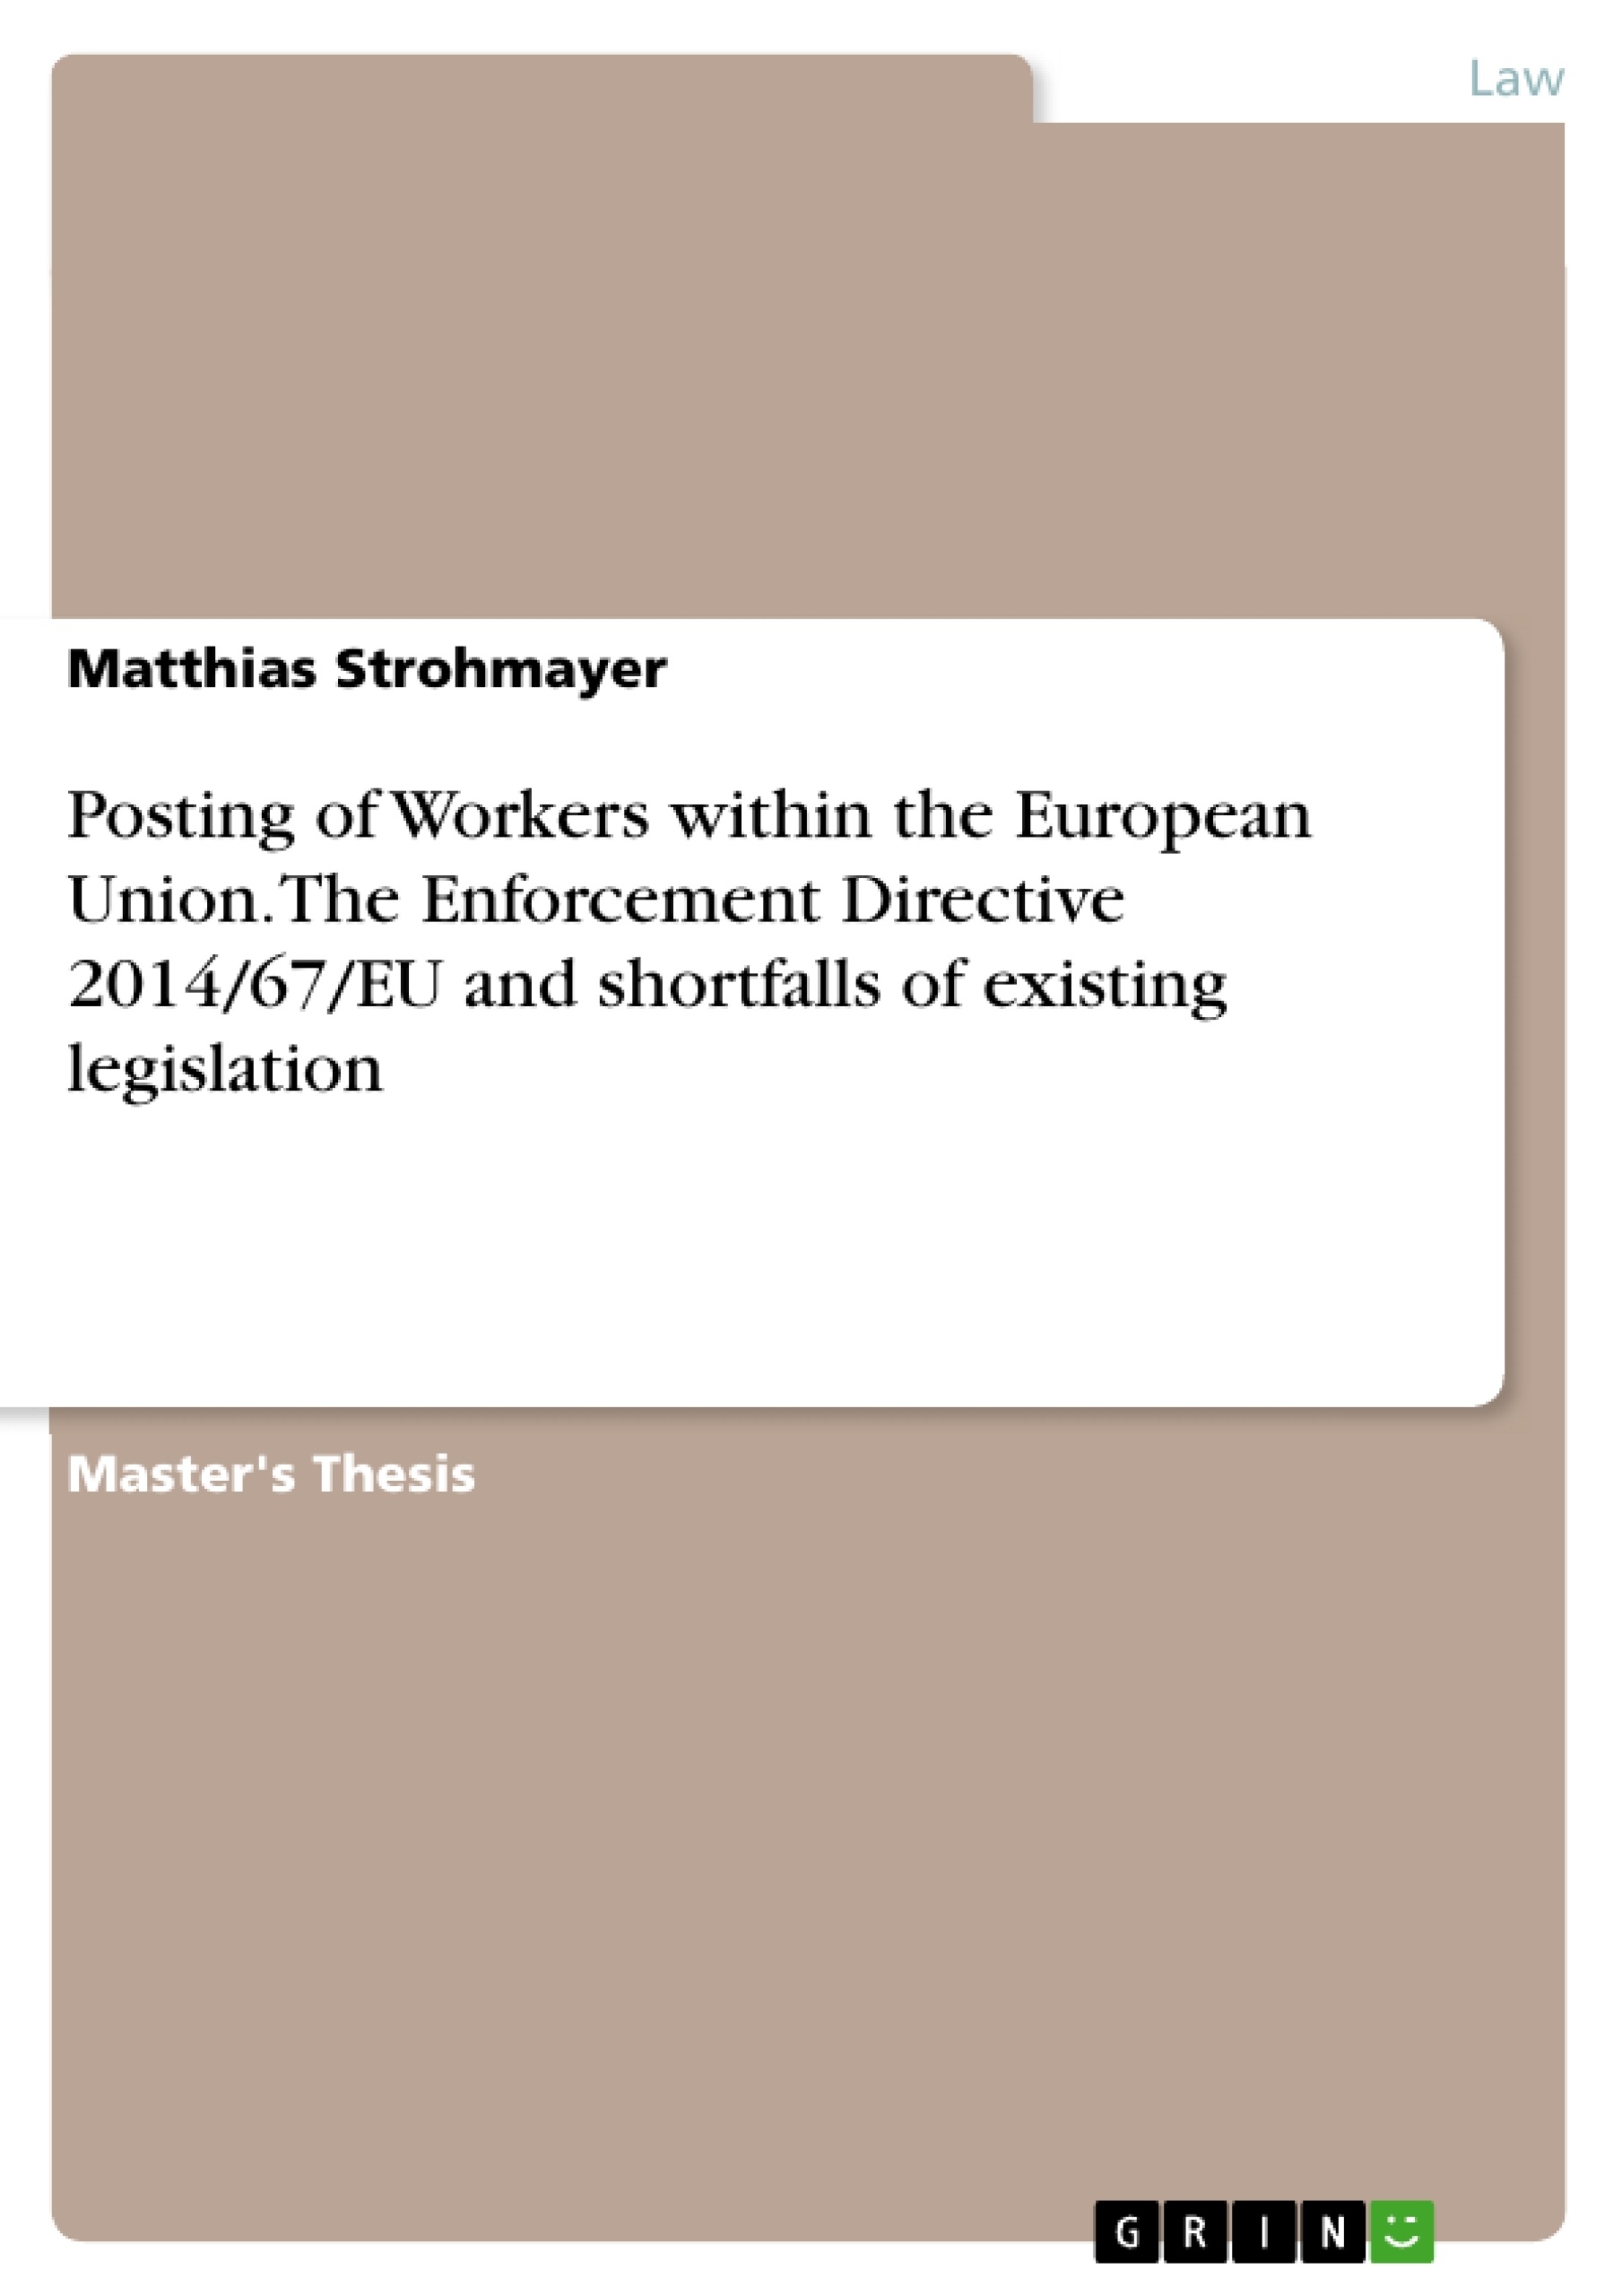 Titre: Posting of Workers within the European Union. The Enforcement Directive 2014/67/EU and shortfalls of existing legislation